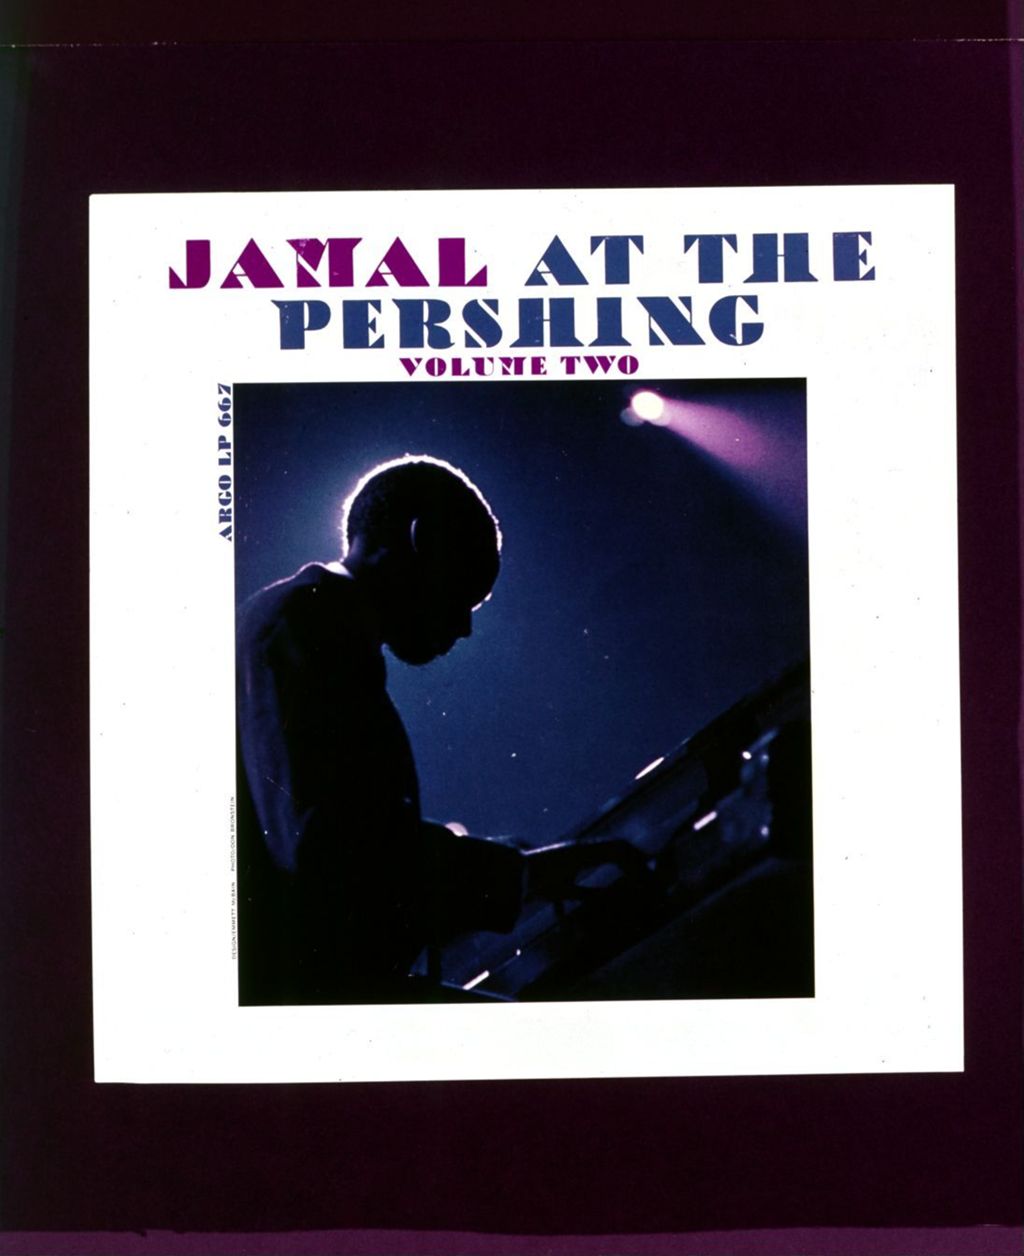 Miniature of Jamal At The Pershing Volume Two, album cover